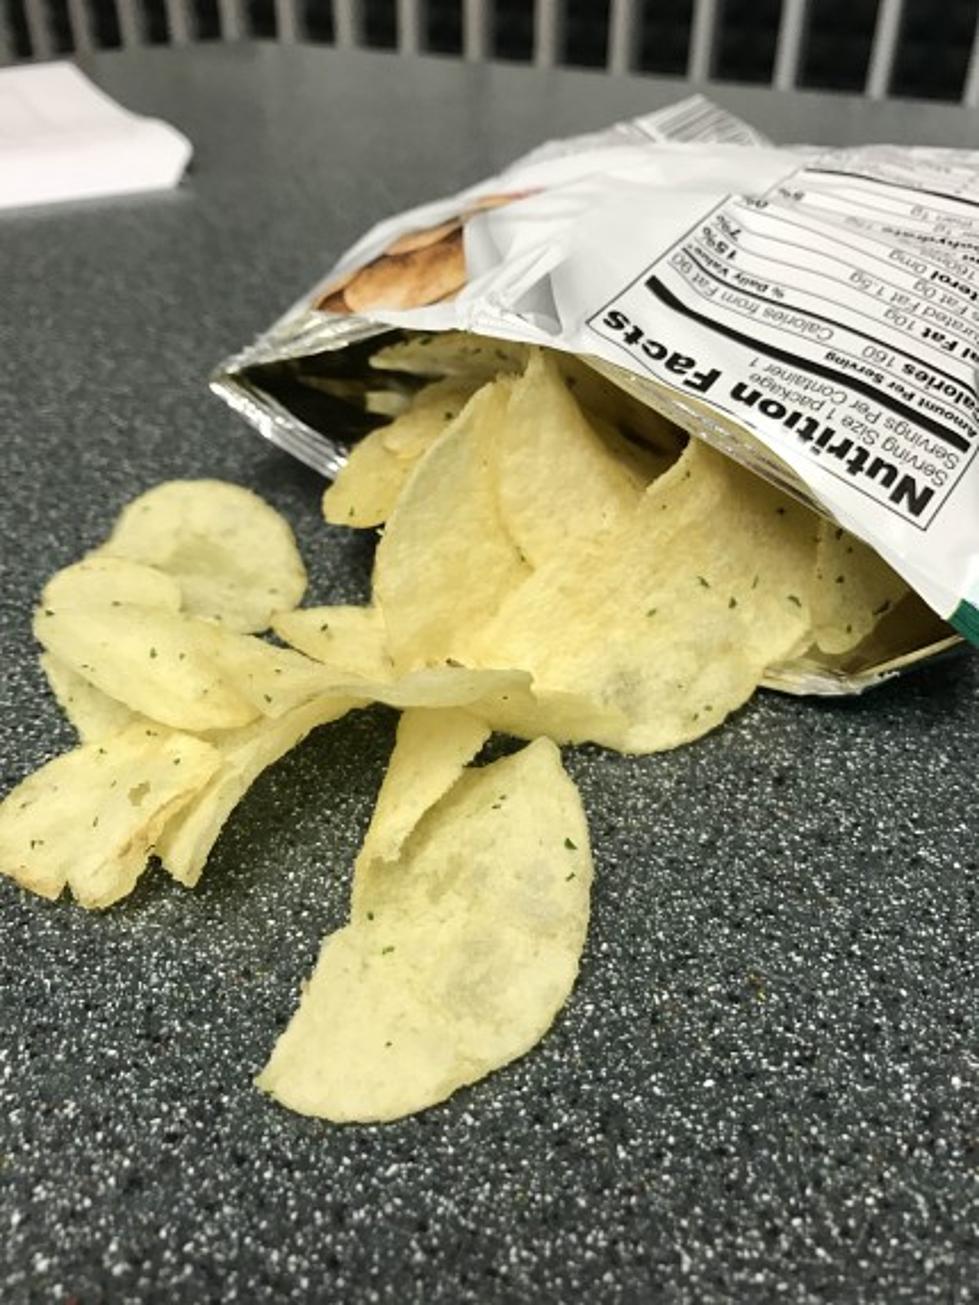 Girl Unknowingly Eats Potato Chips Covered in Something Truly Disgusting